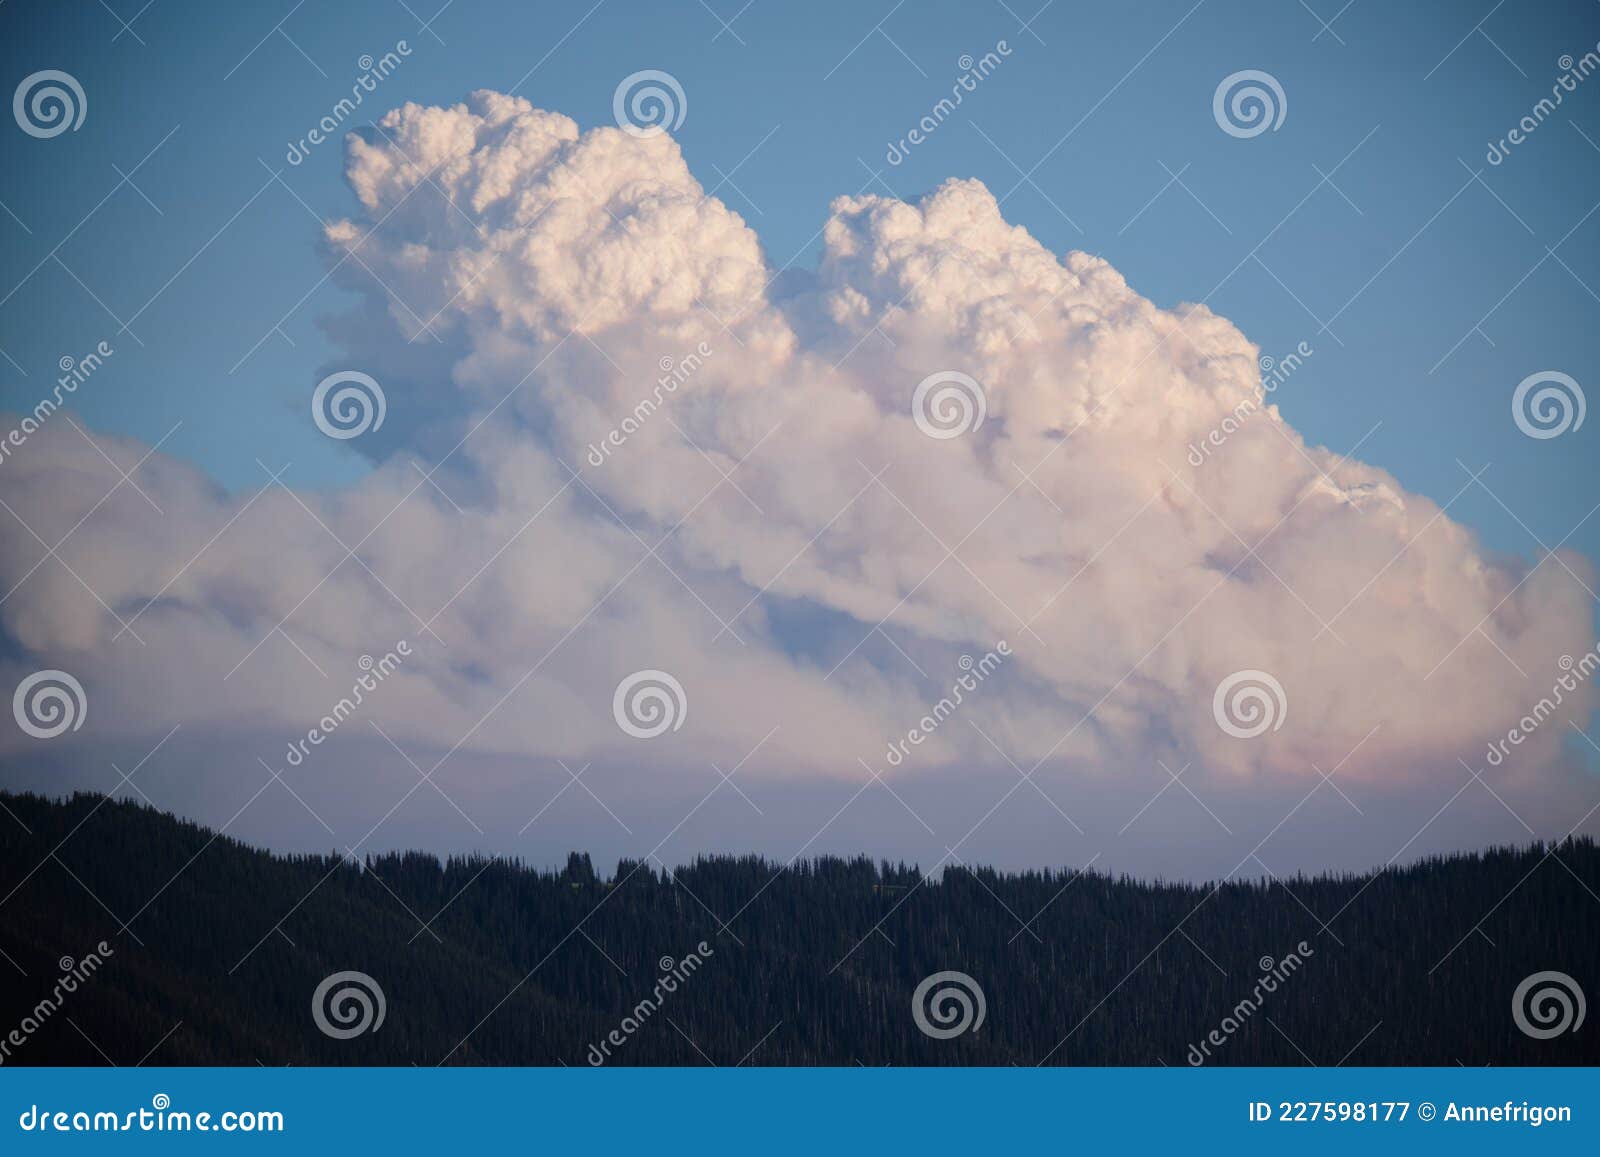 creating it`s own climate:  wildfire cumulo-nimbus cloud, manning park